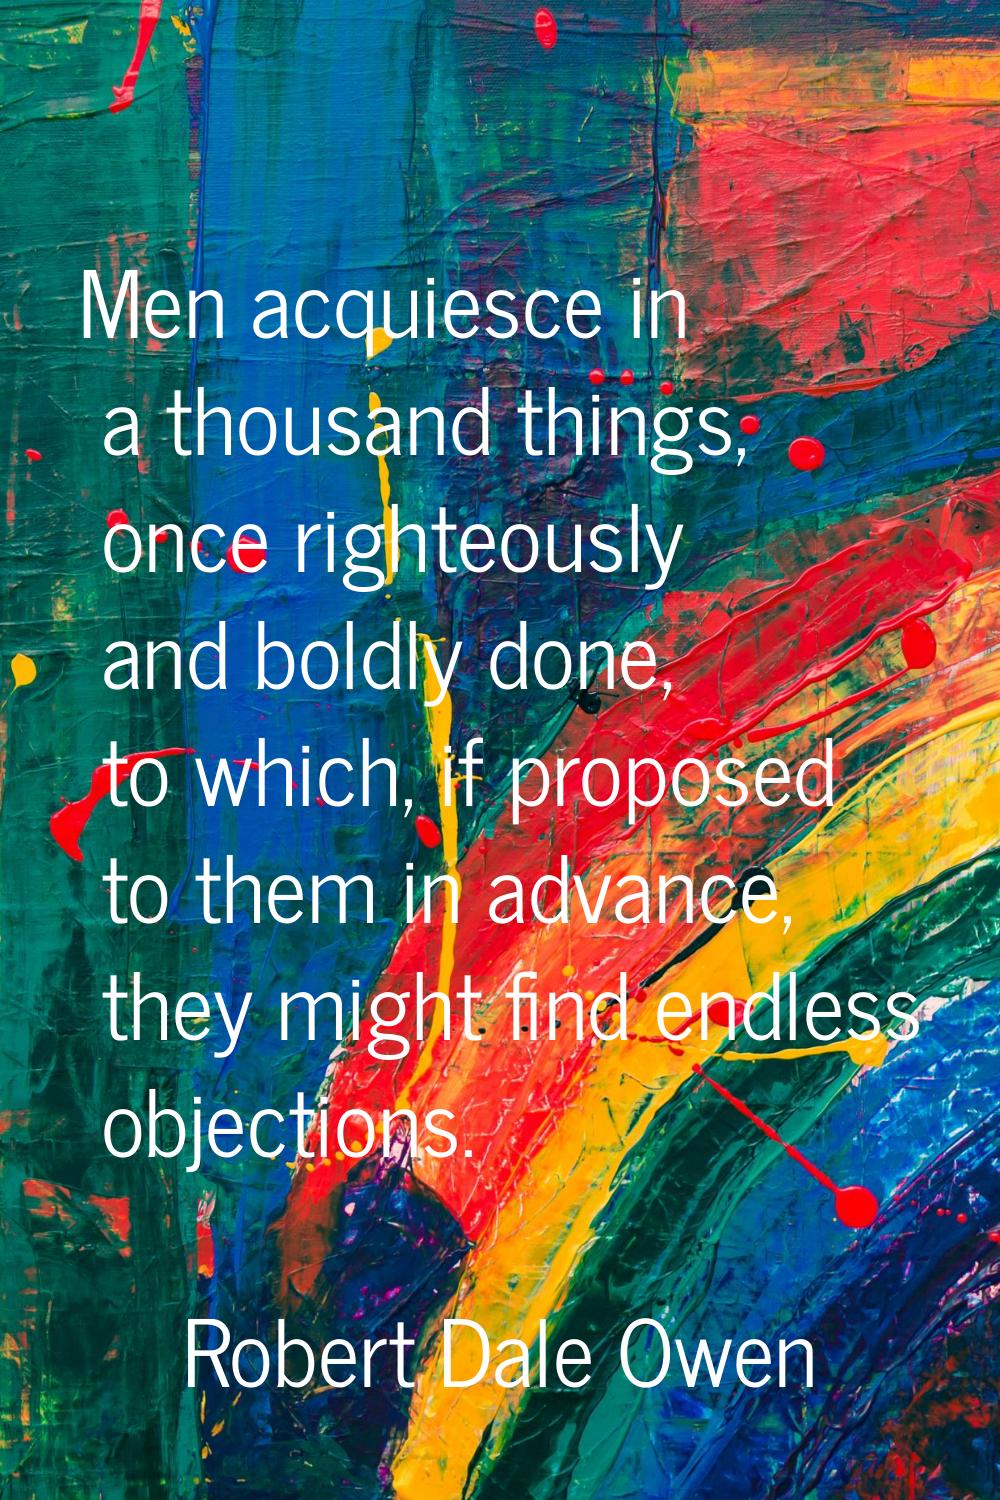 Men acquiesce in a thousand things, once righteously and boldly done, to which, if proposed to them